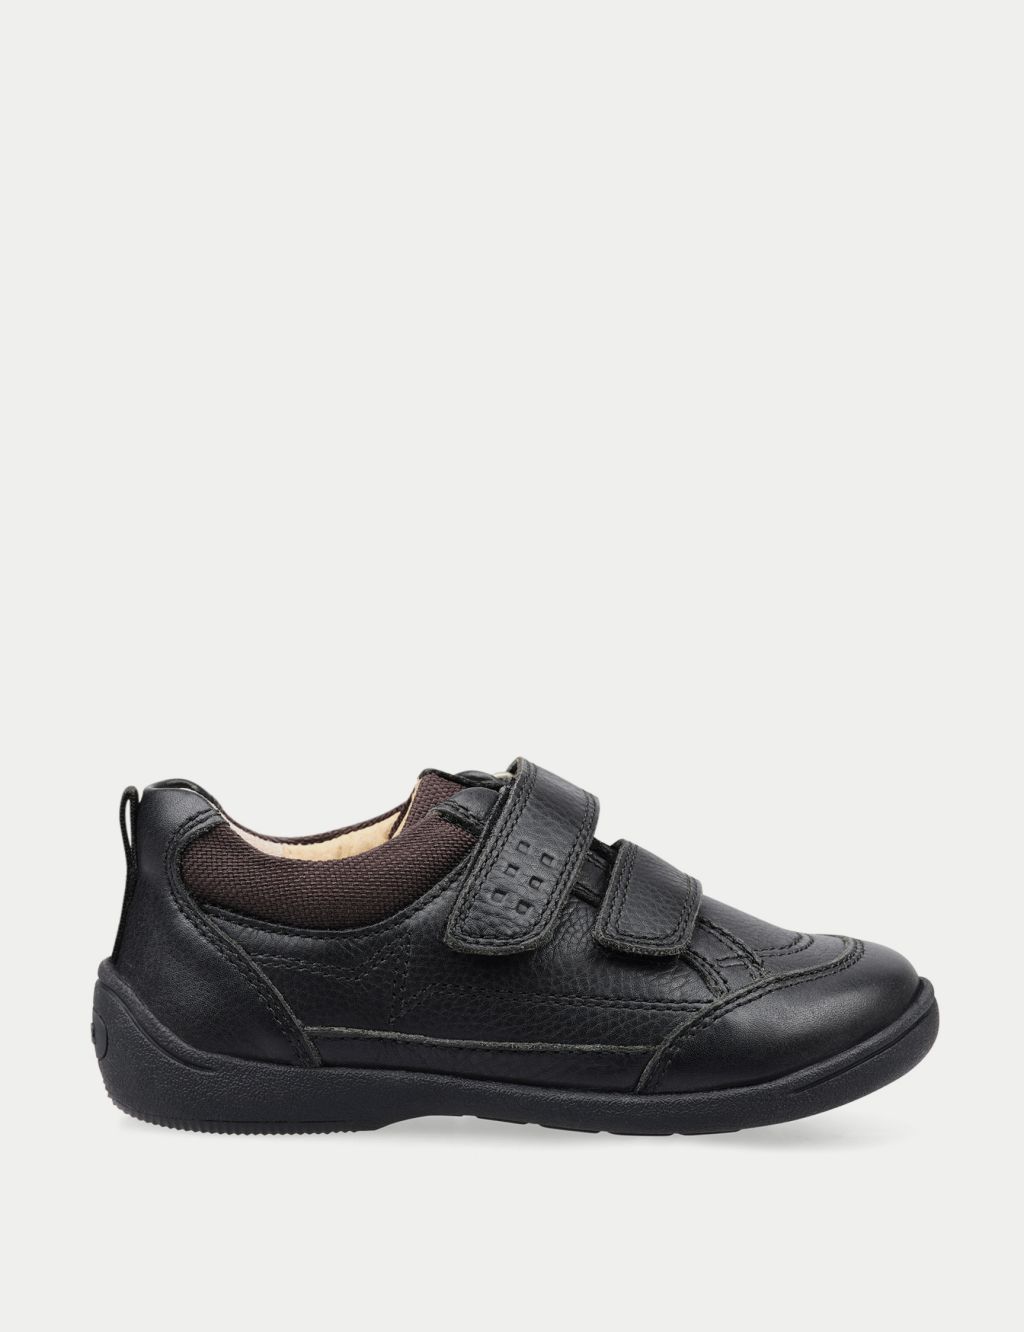 Kids' Leather Riptape Schoolwear Shoes (3 Small - 10.5 Small)